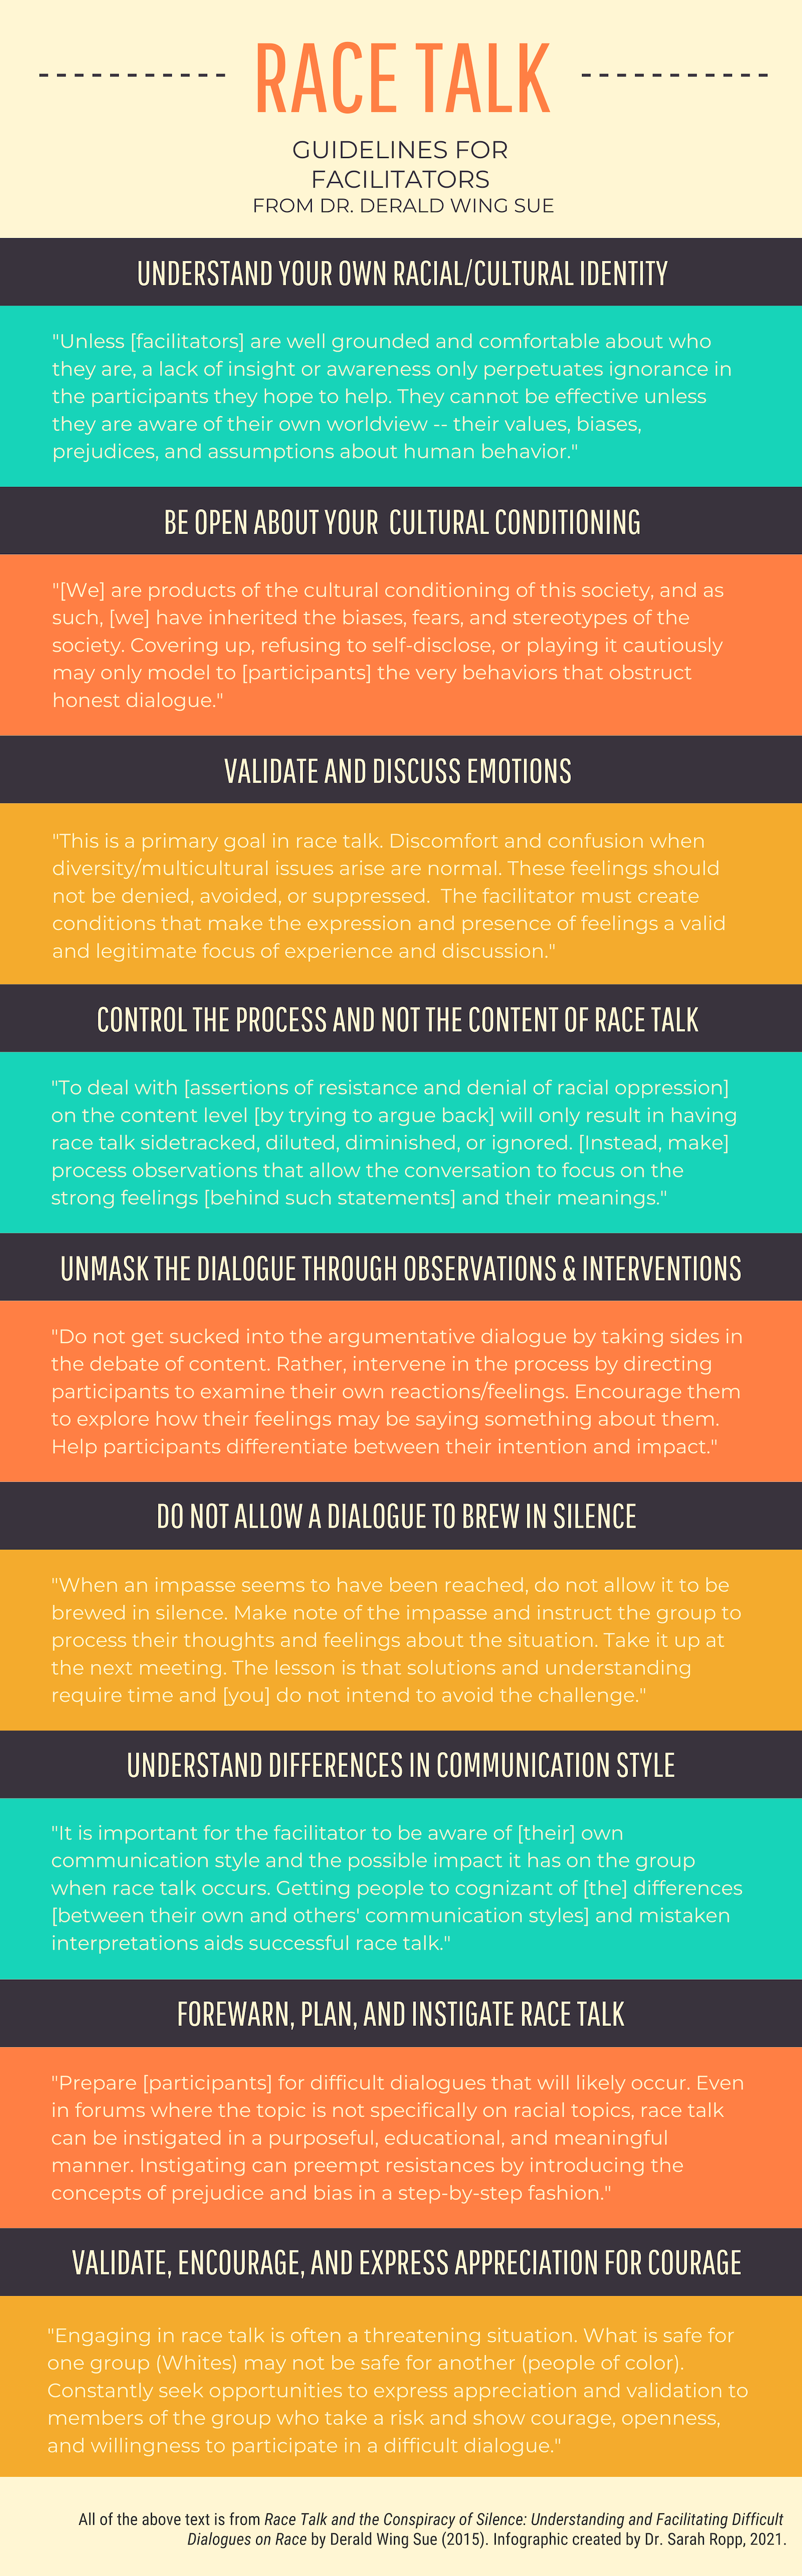 Infographic showing Dr. Derald Wing Sue's Guidelines for Facilitators on Race Talk